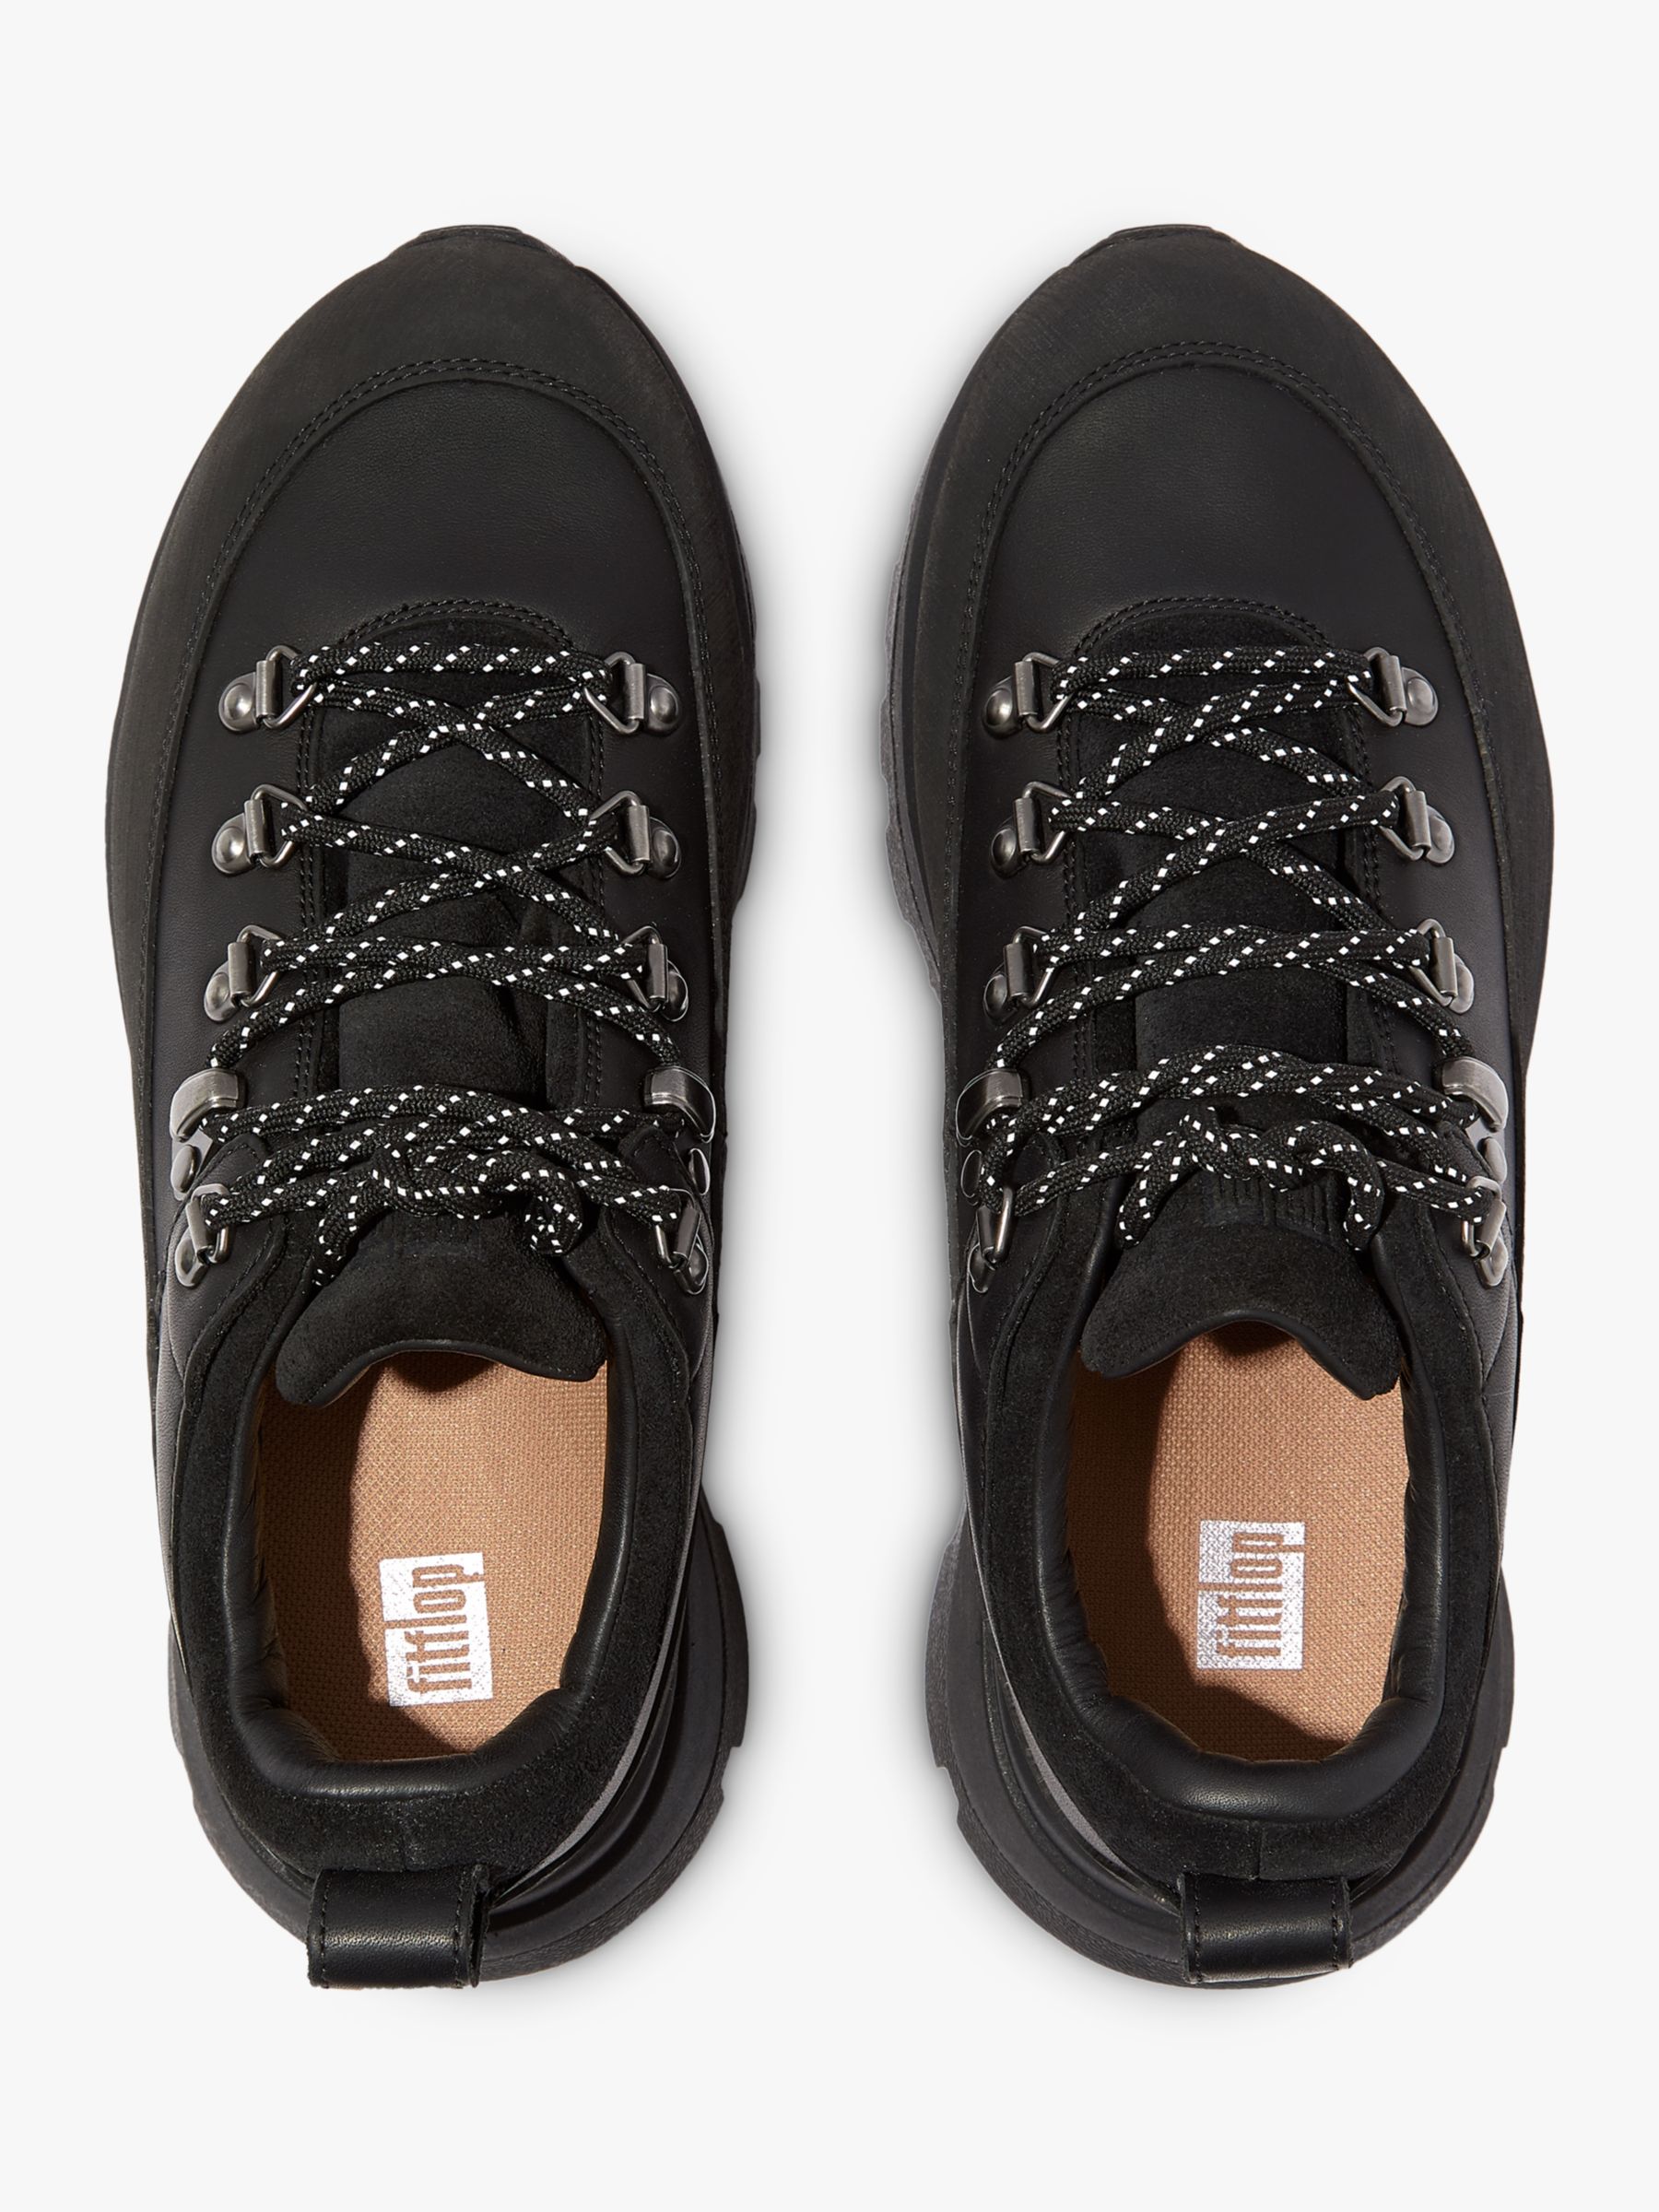 Buy FitFlop Neo-D-Hyker Leather Blend Walking Shoes, Black Online at johnlewis.com